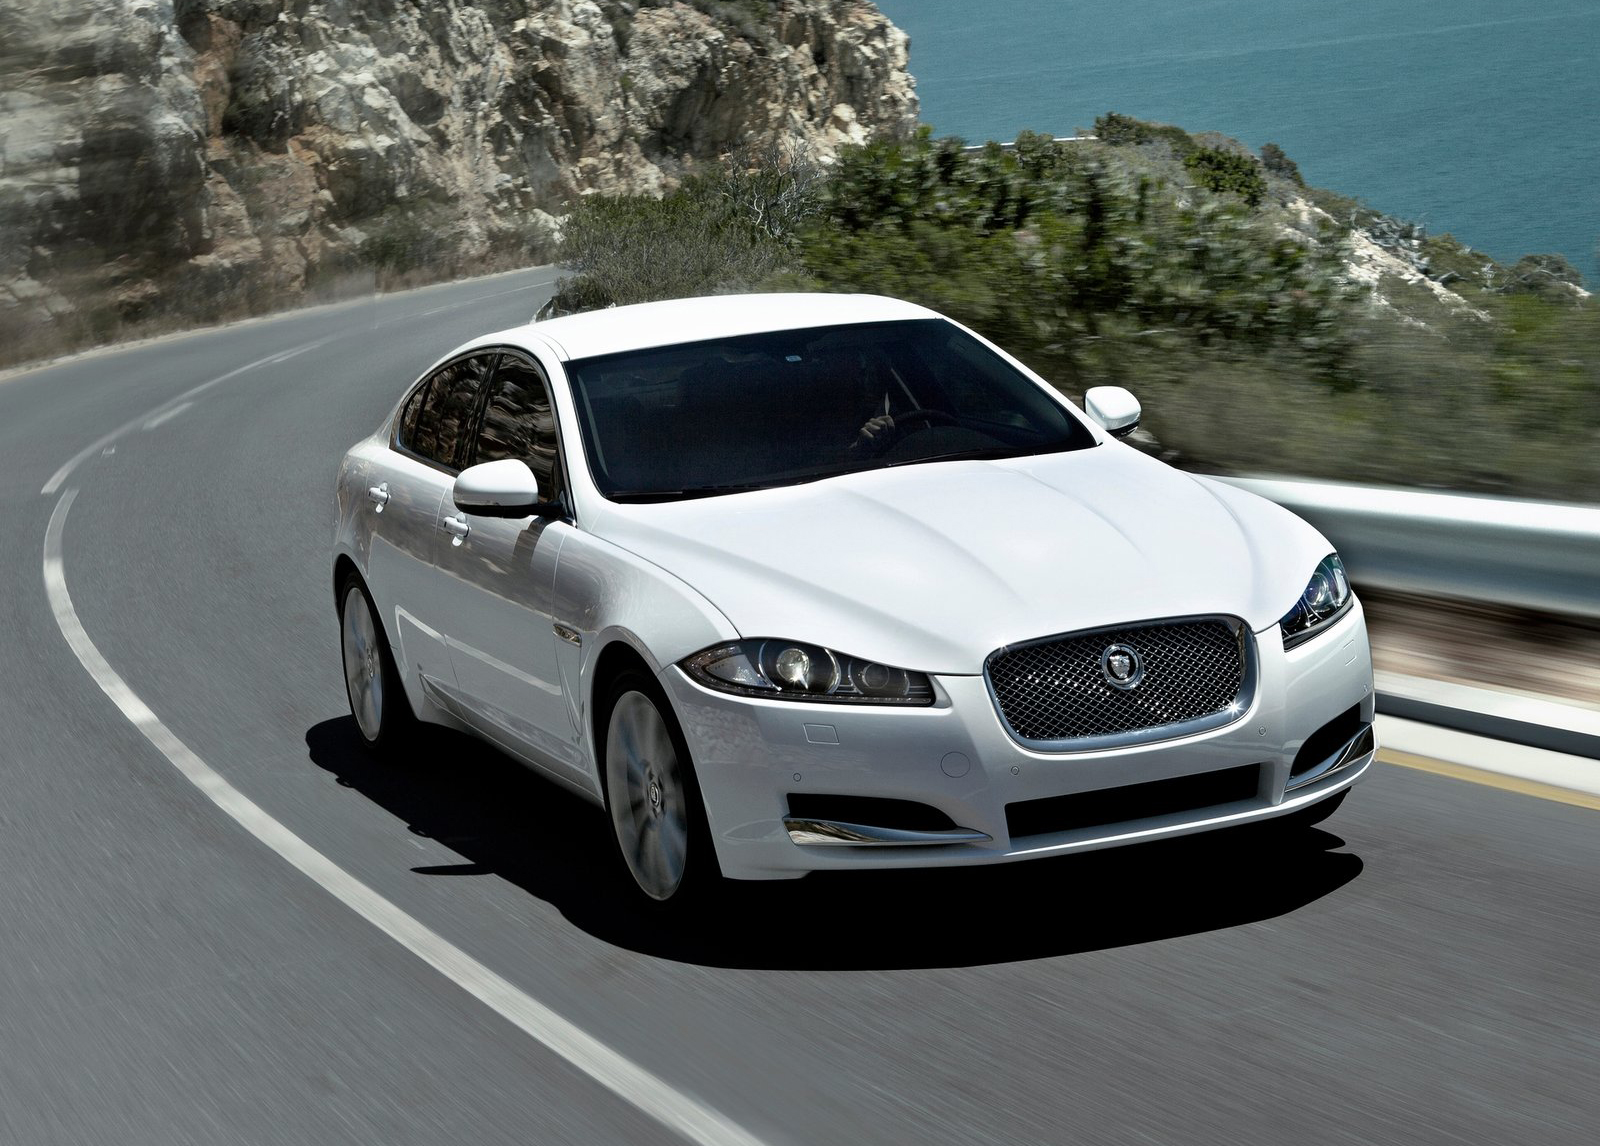 Jaguar XF | HD Wallpapers (High Definition) | Free Background